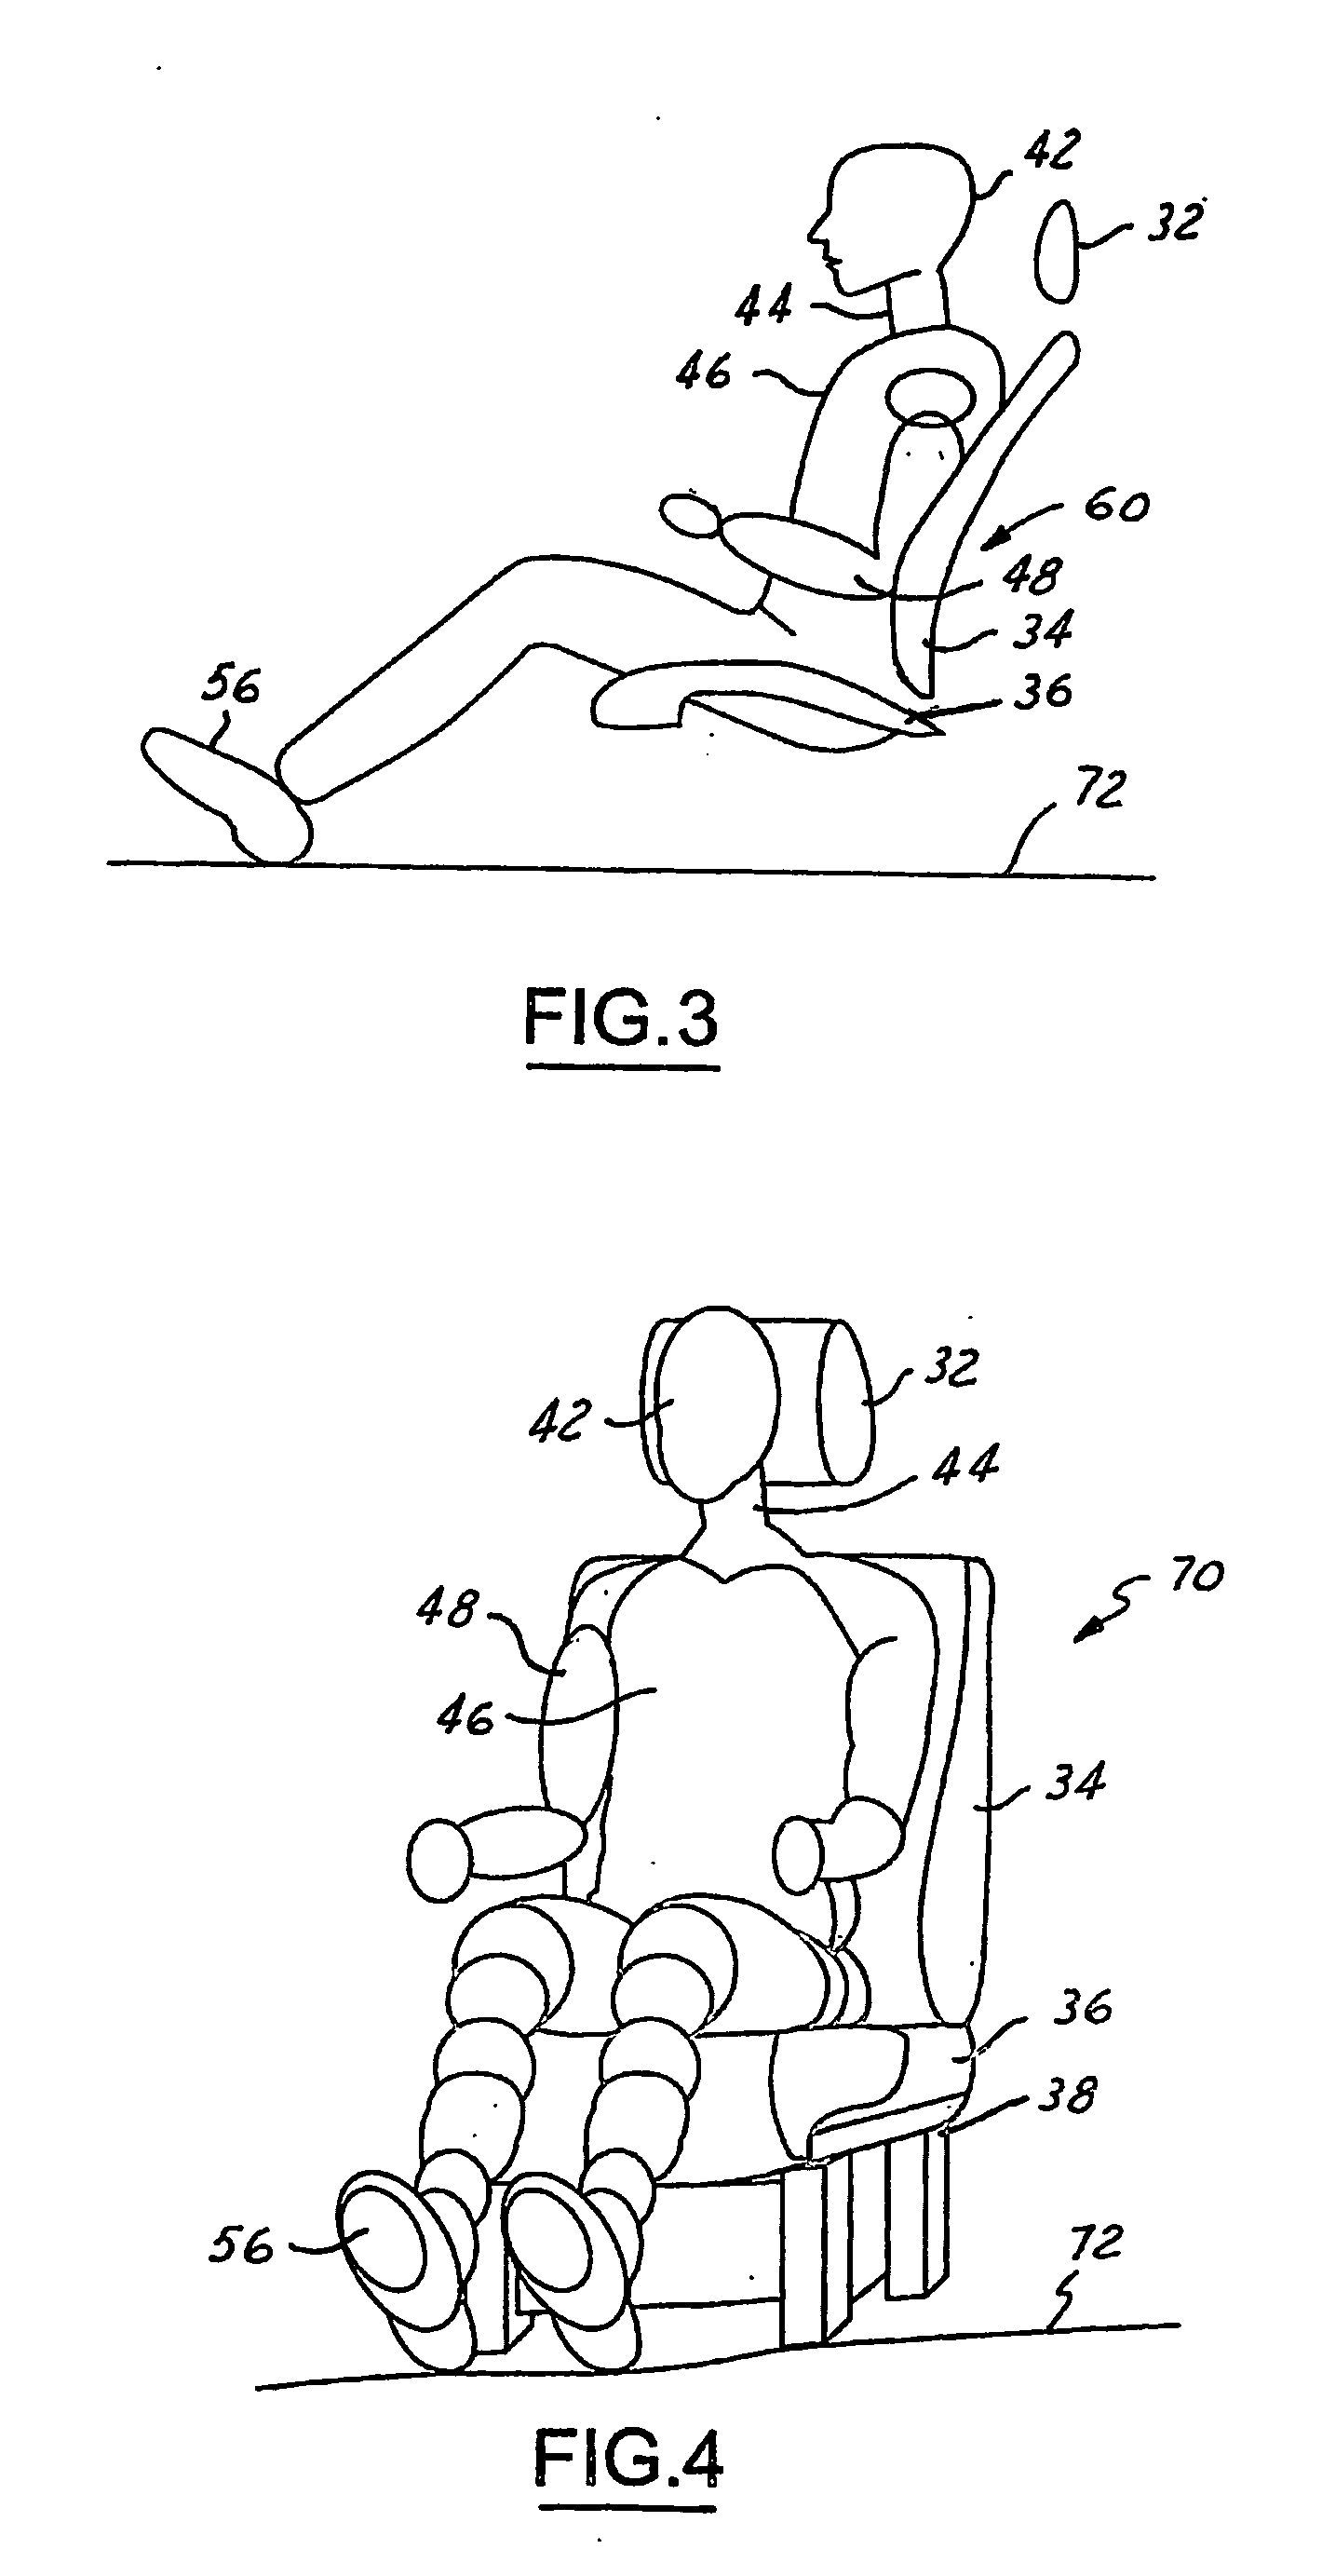 Method of designing automotive seat assemblies for rear impact performance